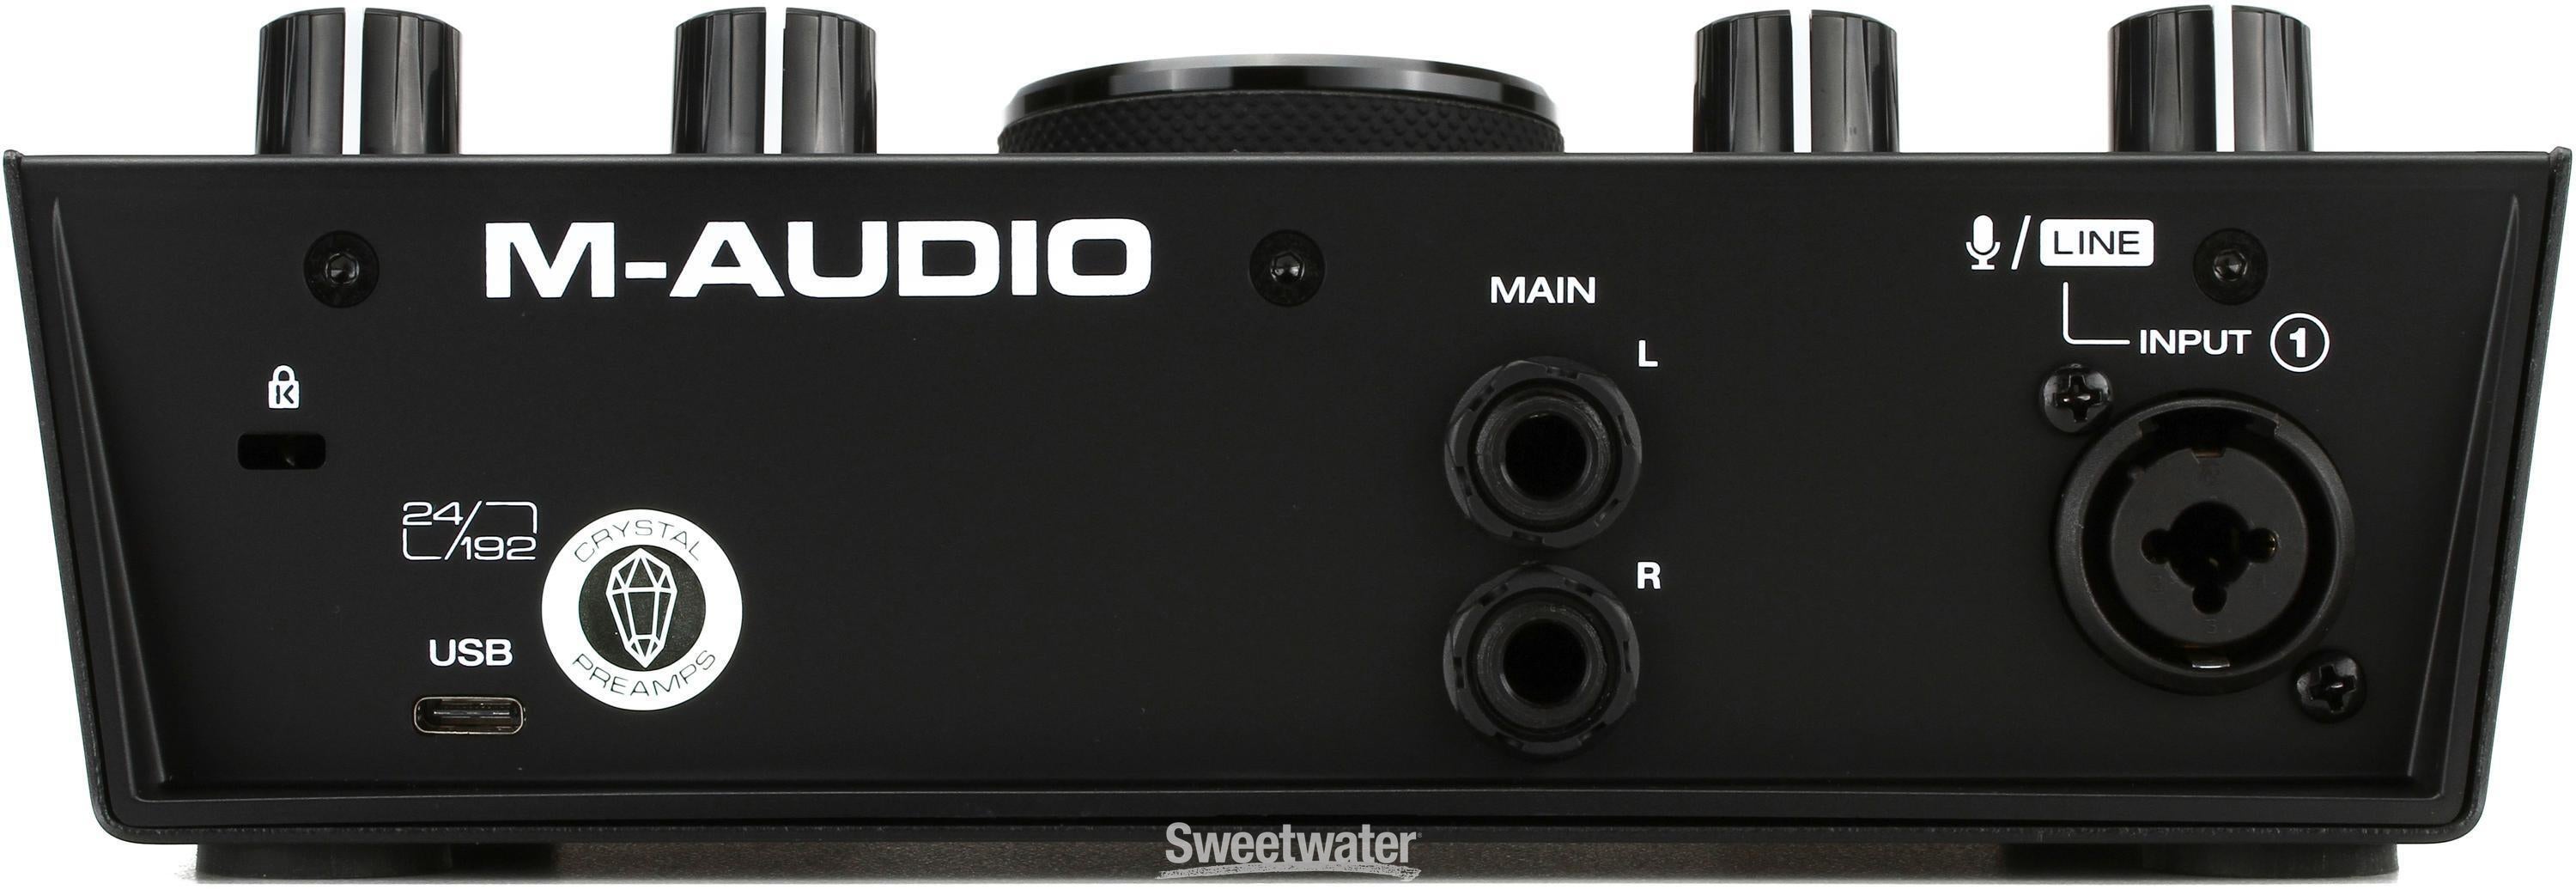 M-Audio AIR 192|4 USB Audio Interface | Sweetwater